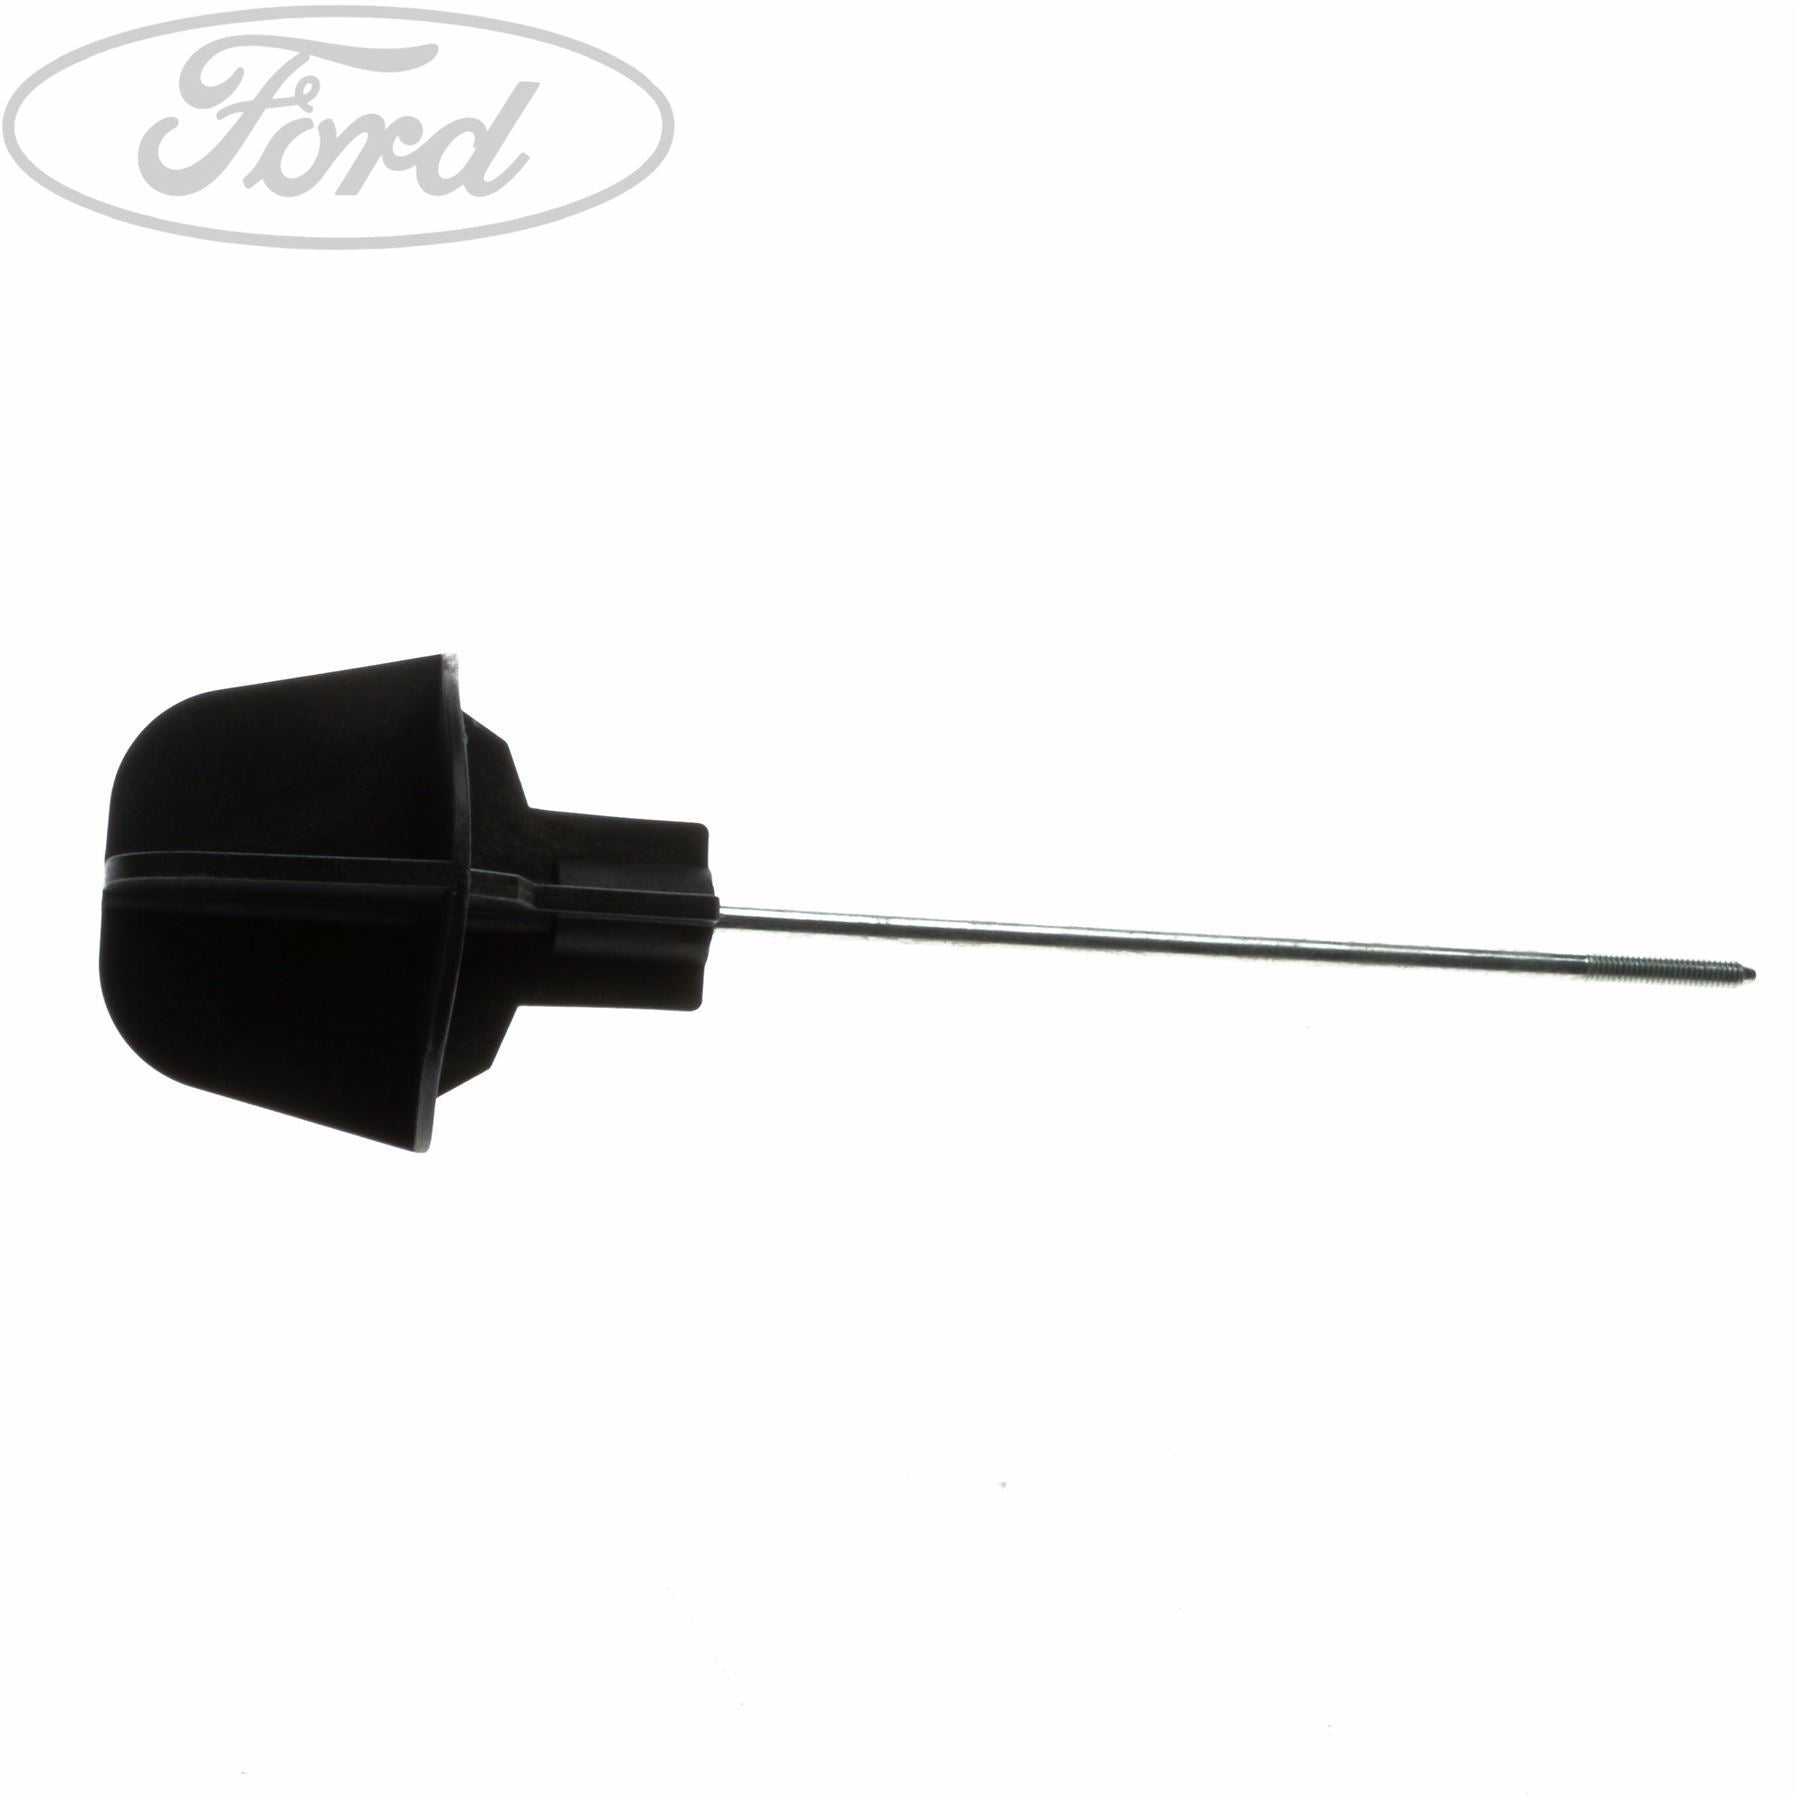 Ford, SPARE WHEEL MOUNTING BOLT